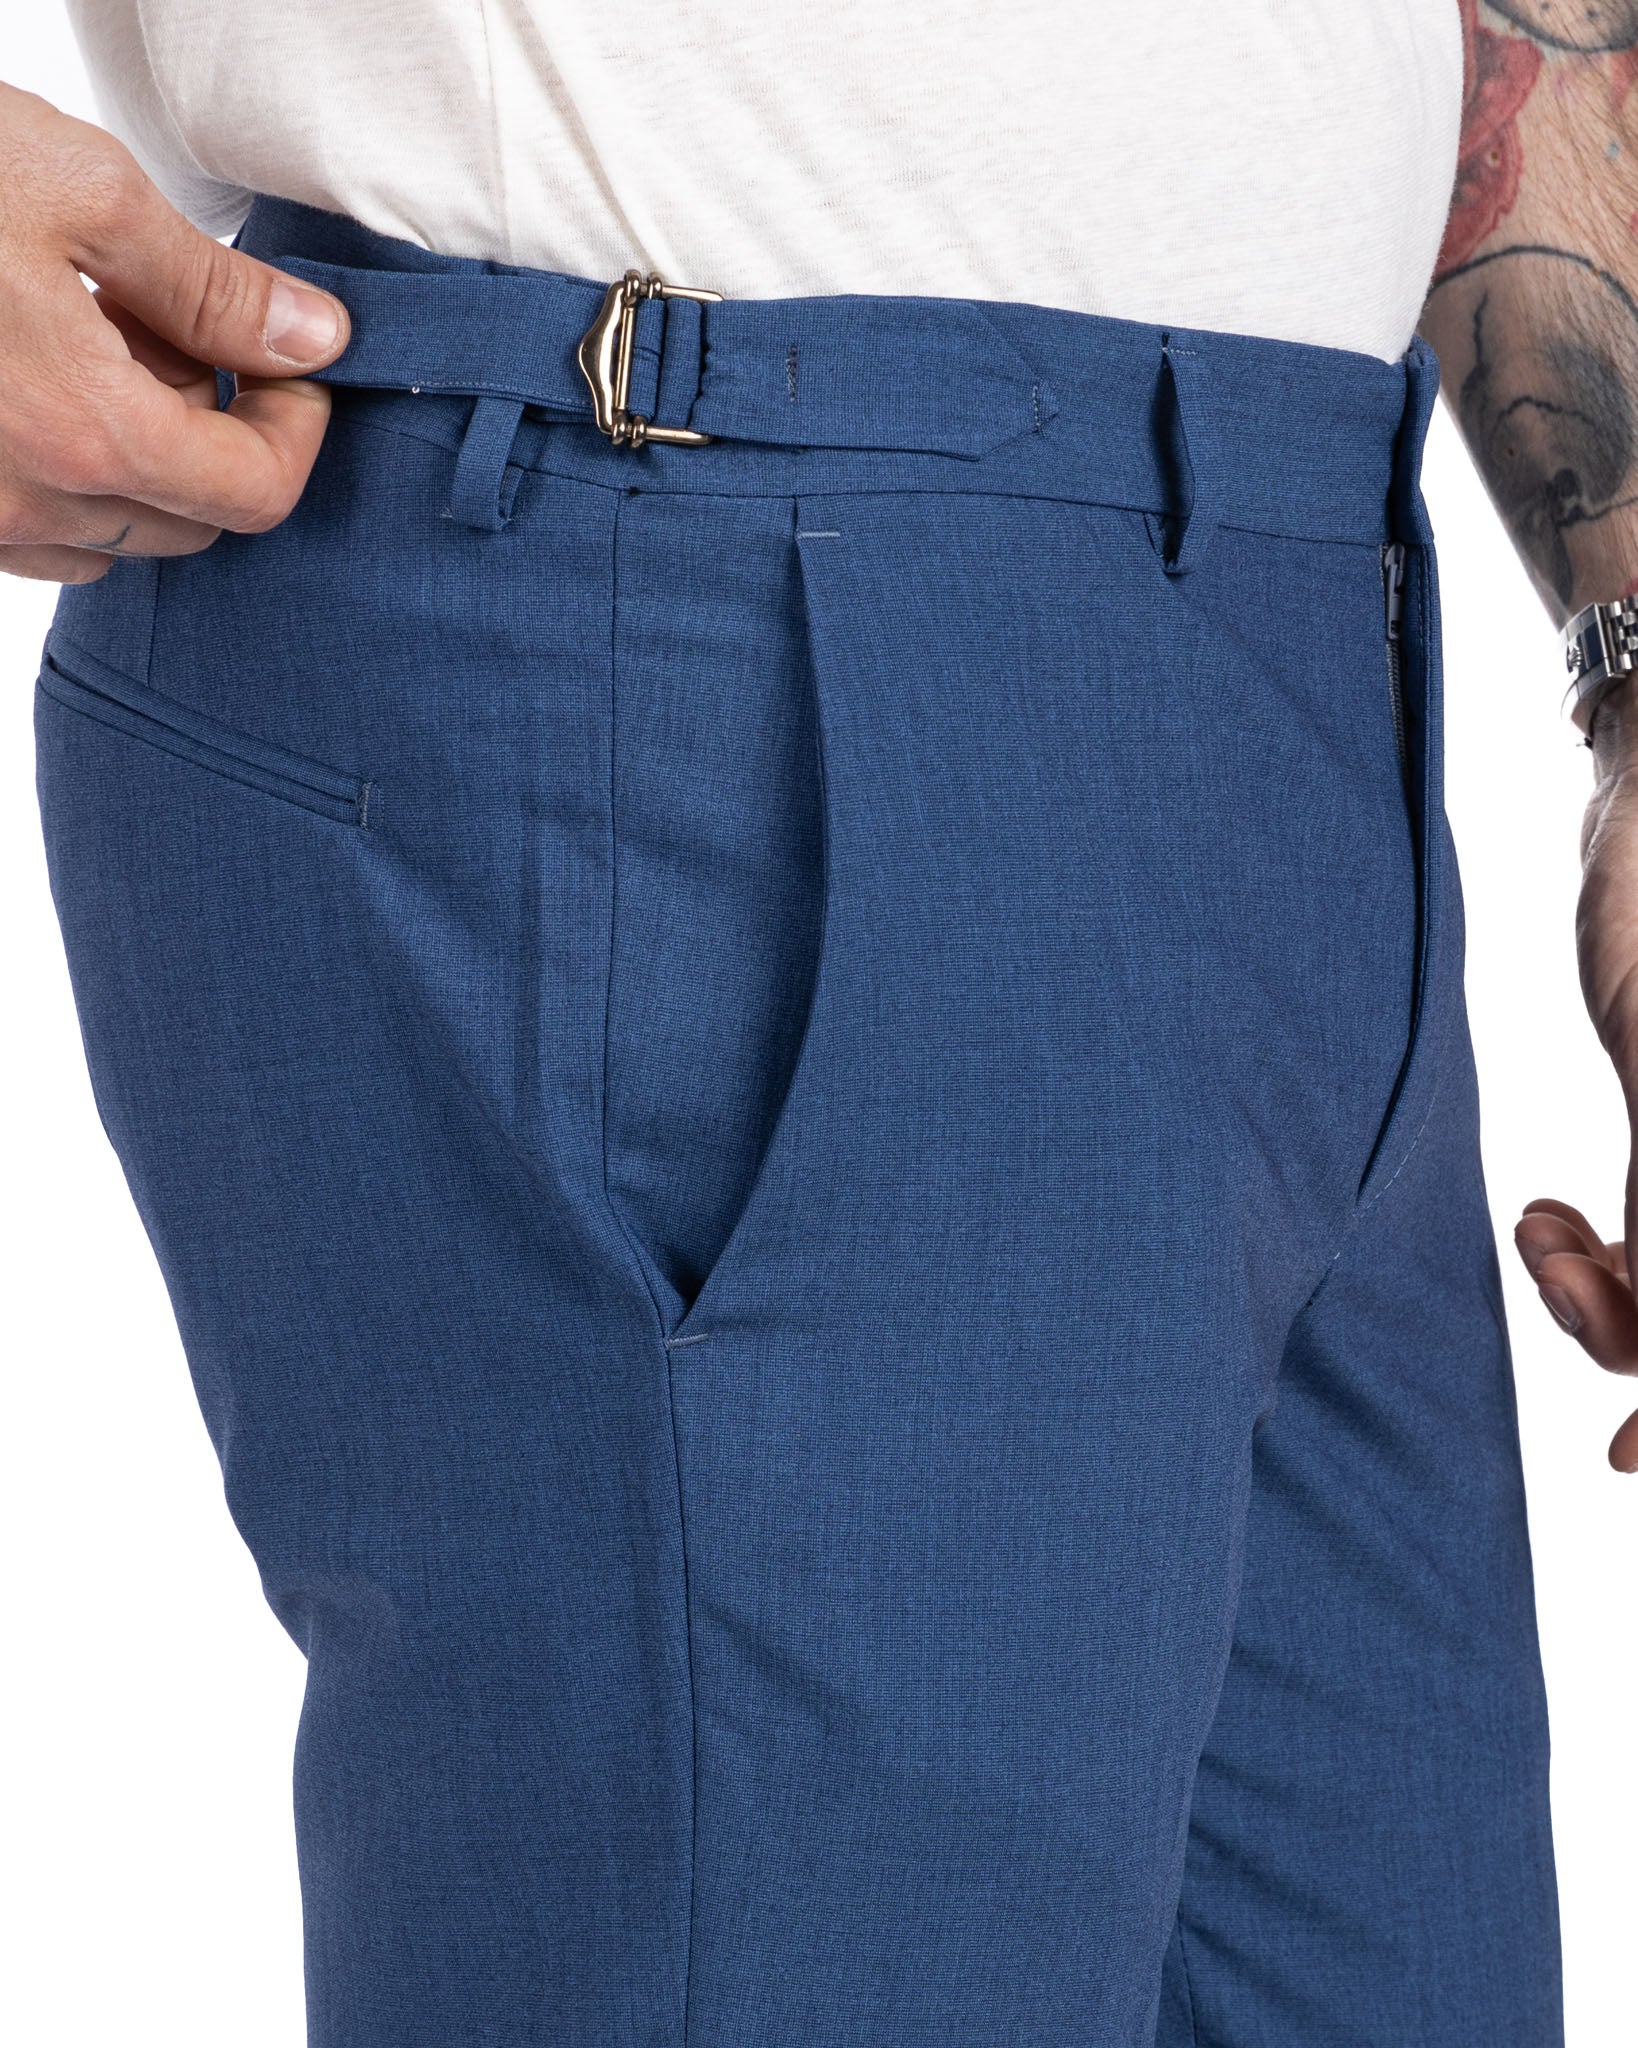 Trani - denim trousers with buckles